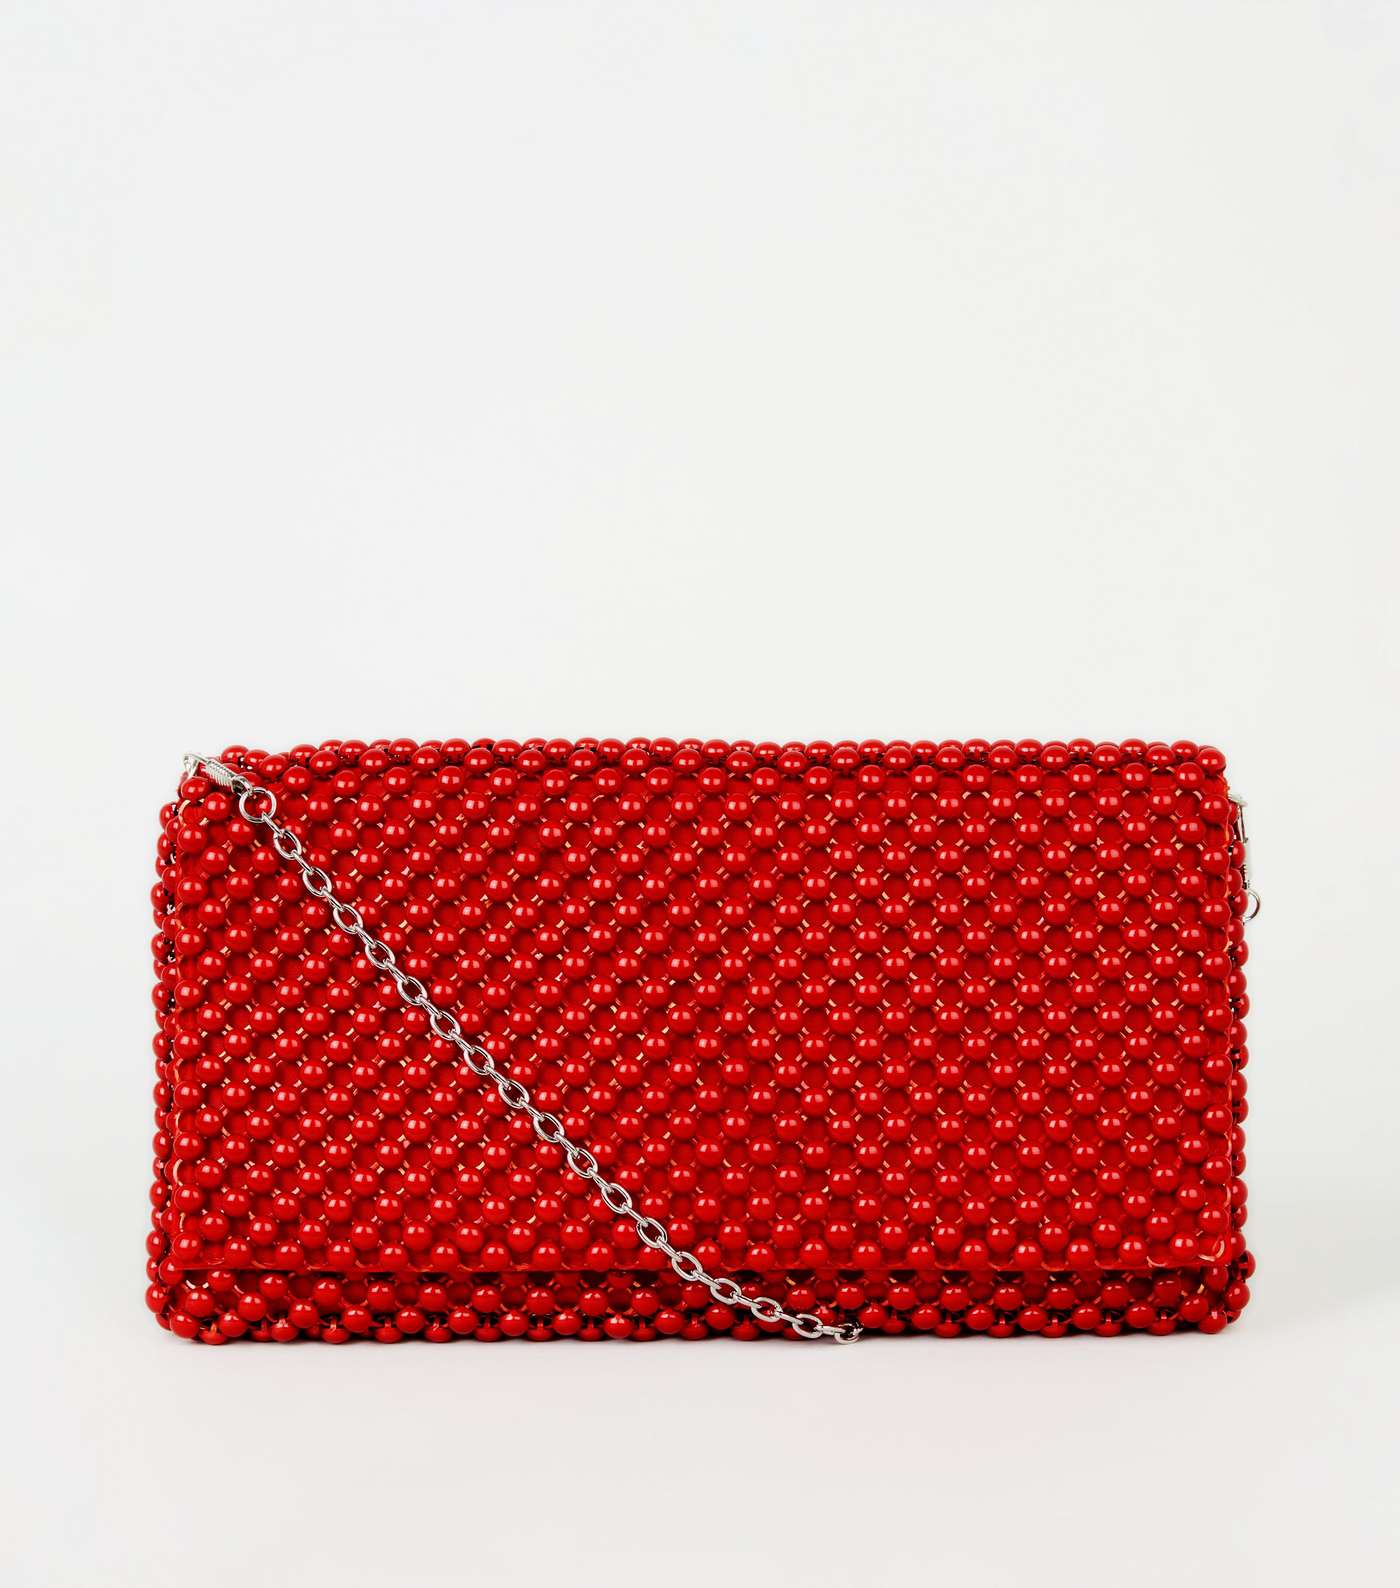 Red Beaded Foldover Clutch Bag